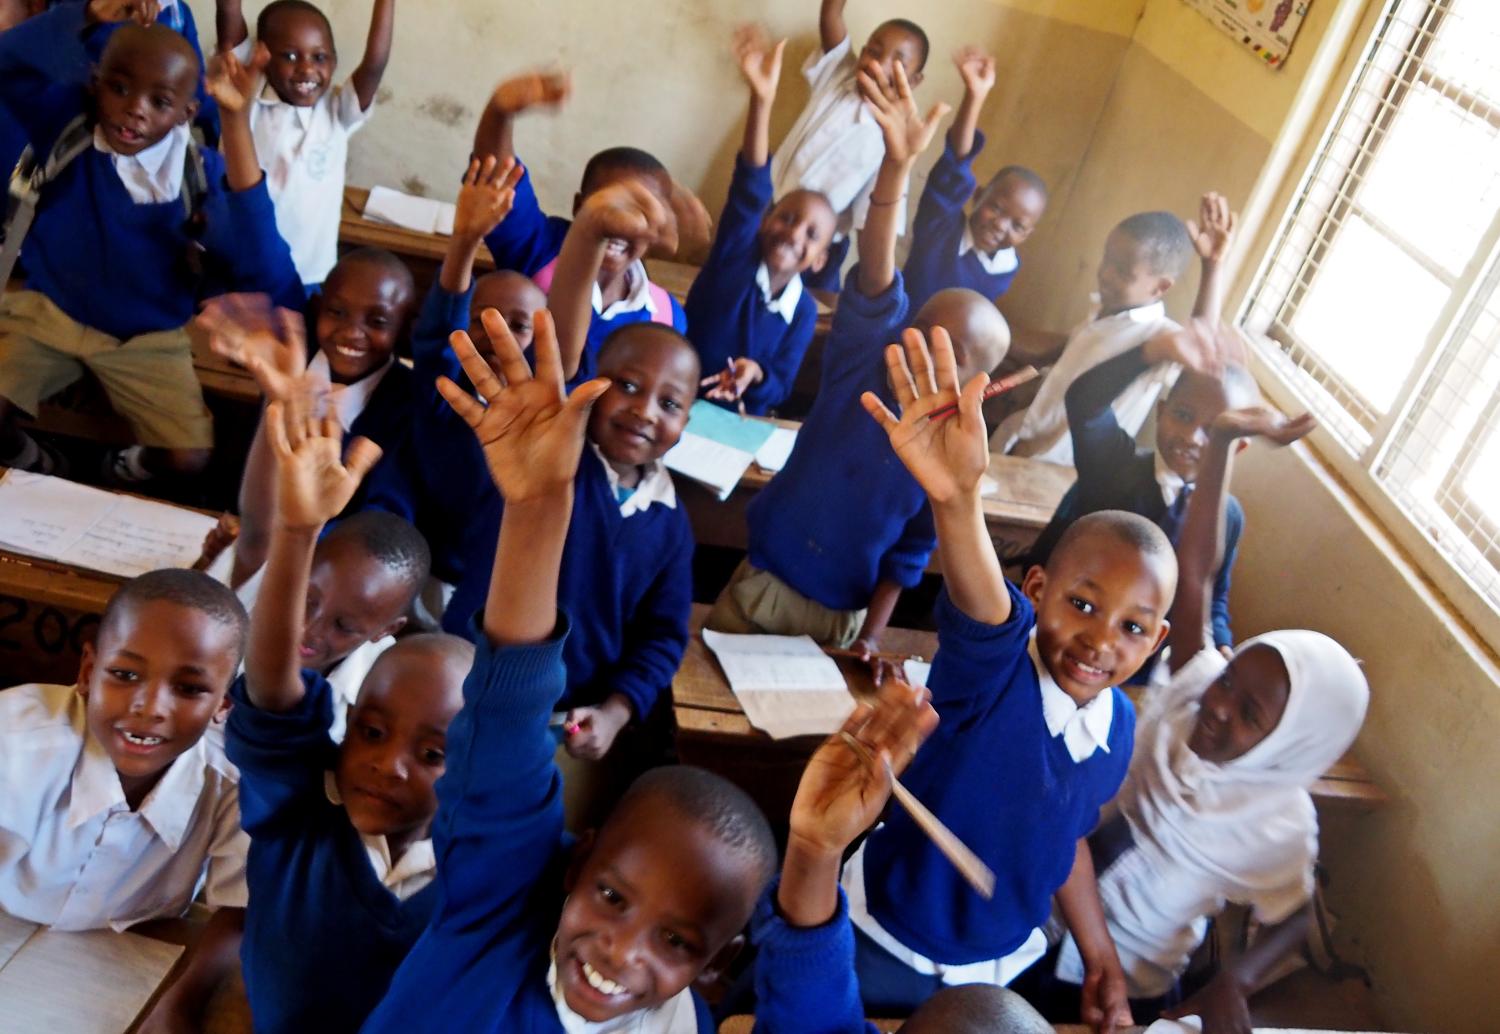 Moshi, Kilimanjaro / Tanzania - 10.06.2015: African children in a class at the Mawenzi Municipal Primary School raise their hands to answer the teacher's question.